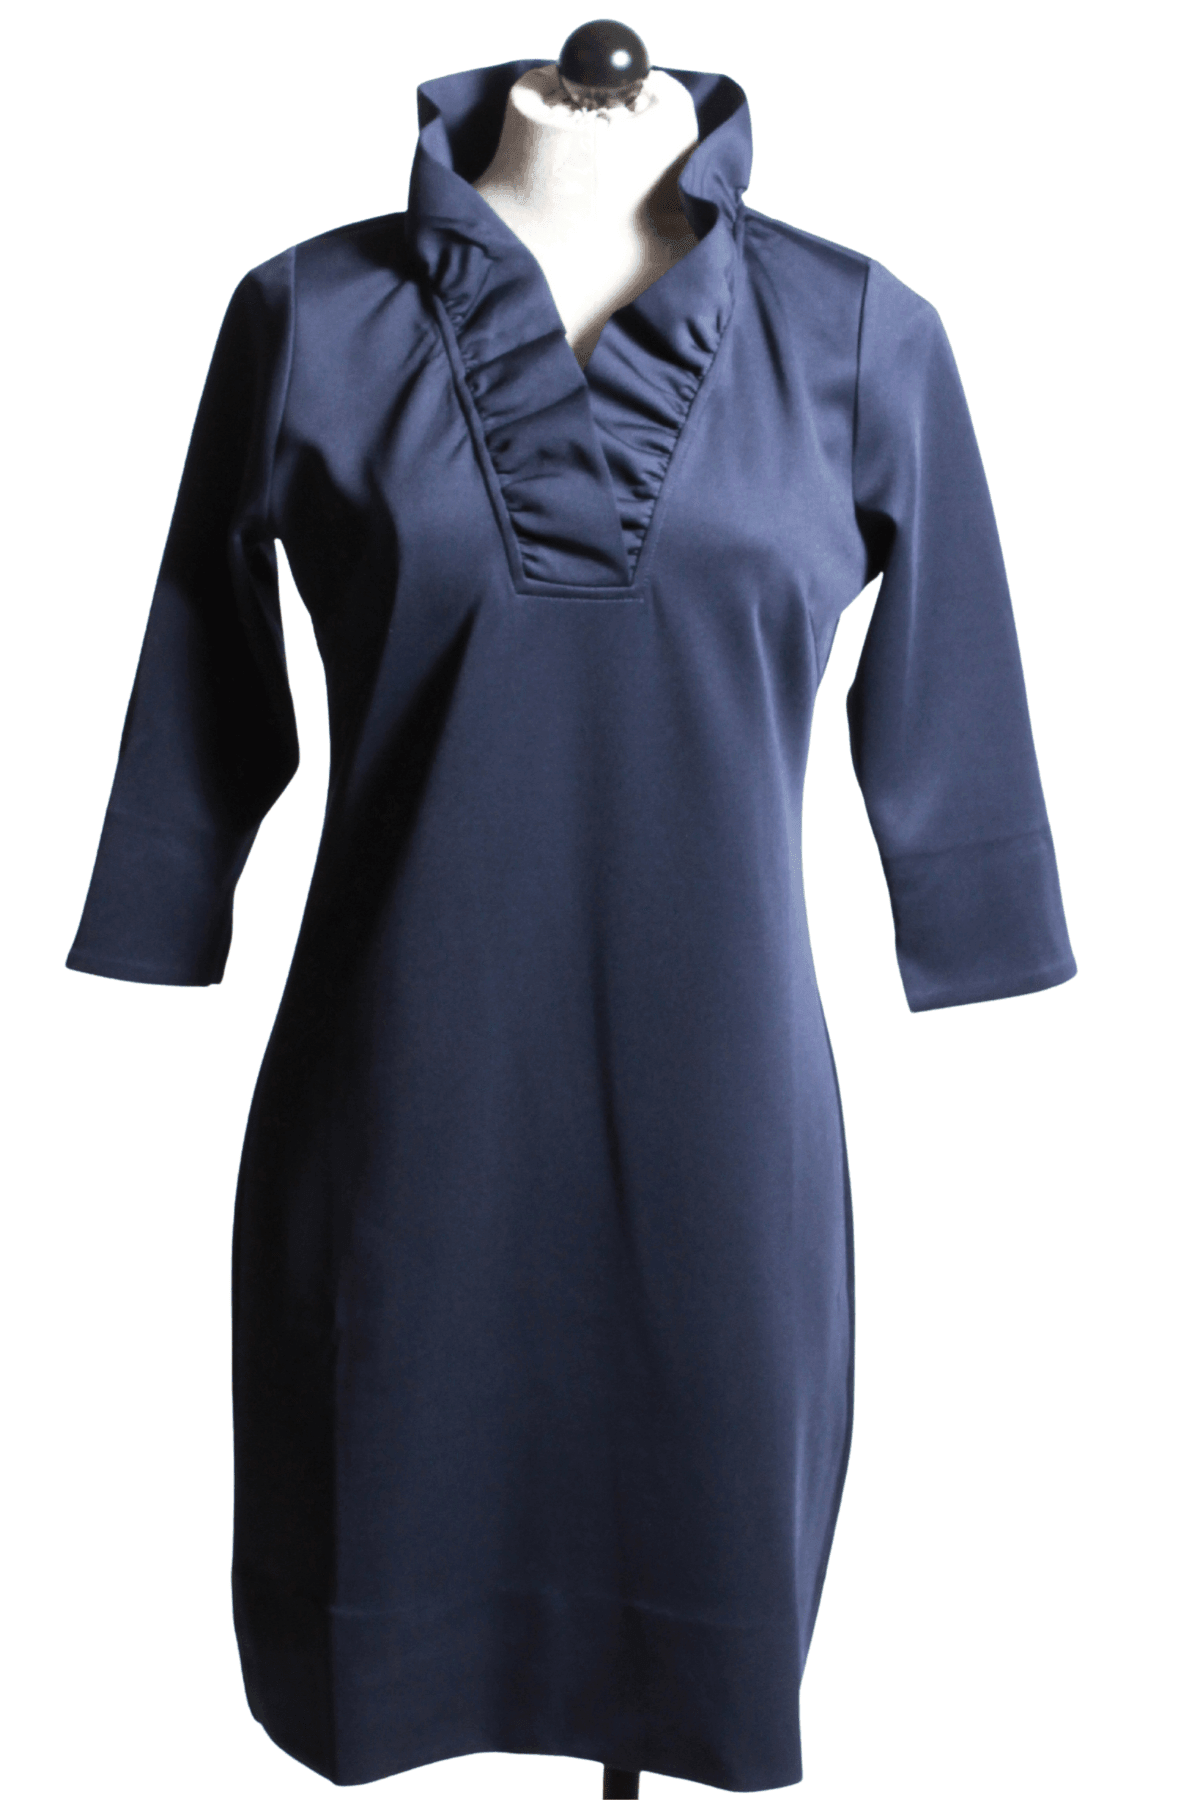 3/4 sleeve solid navy dress has a stand up 2 1/2" ruffled V Neck collar